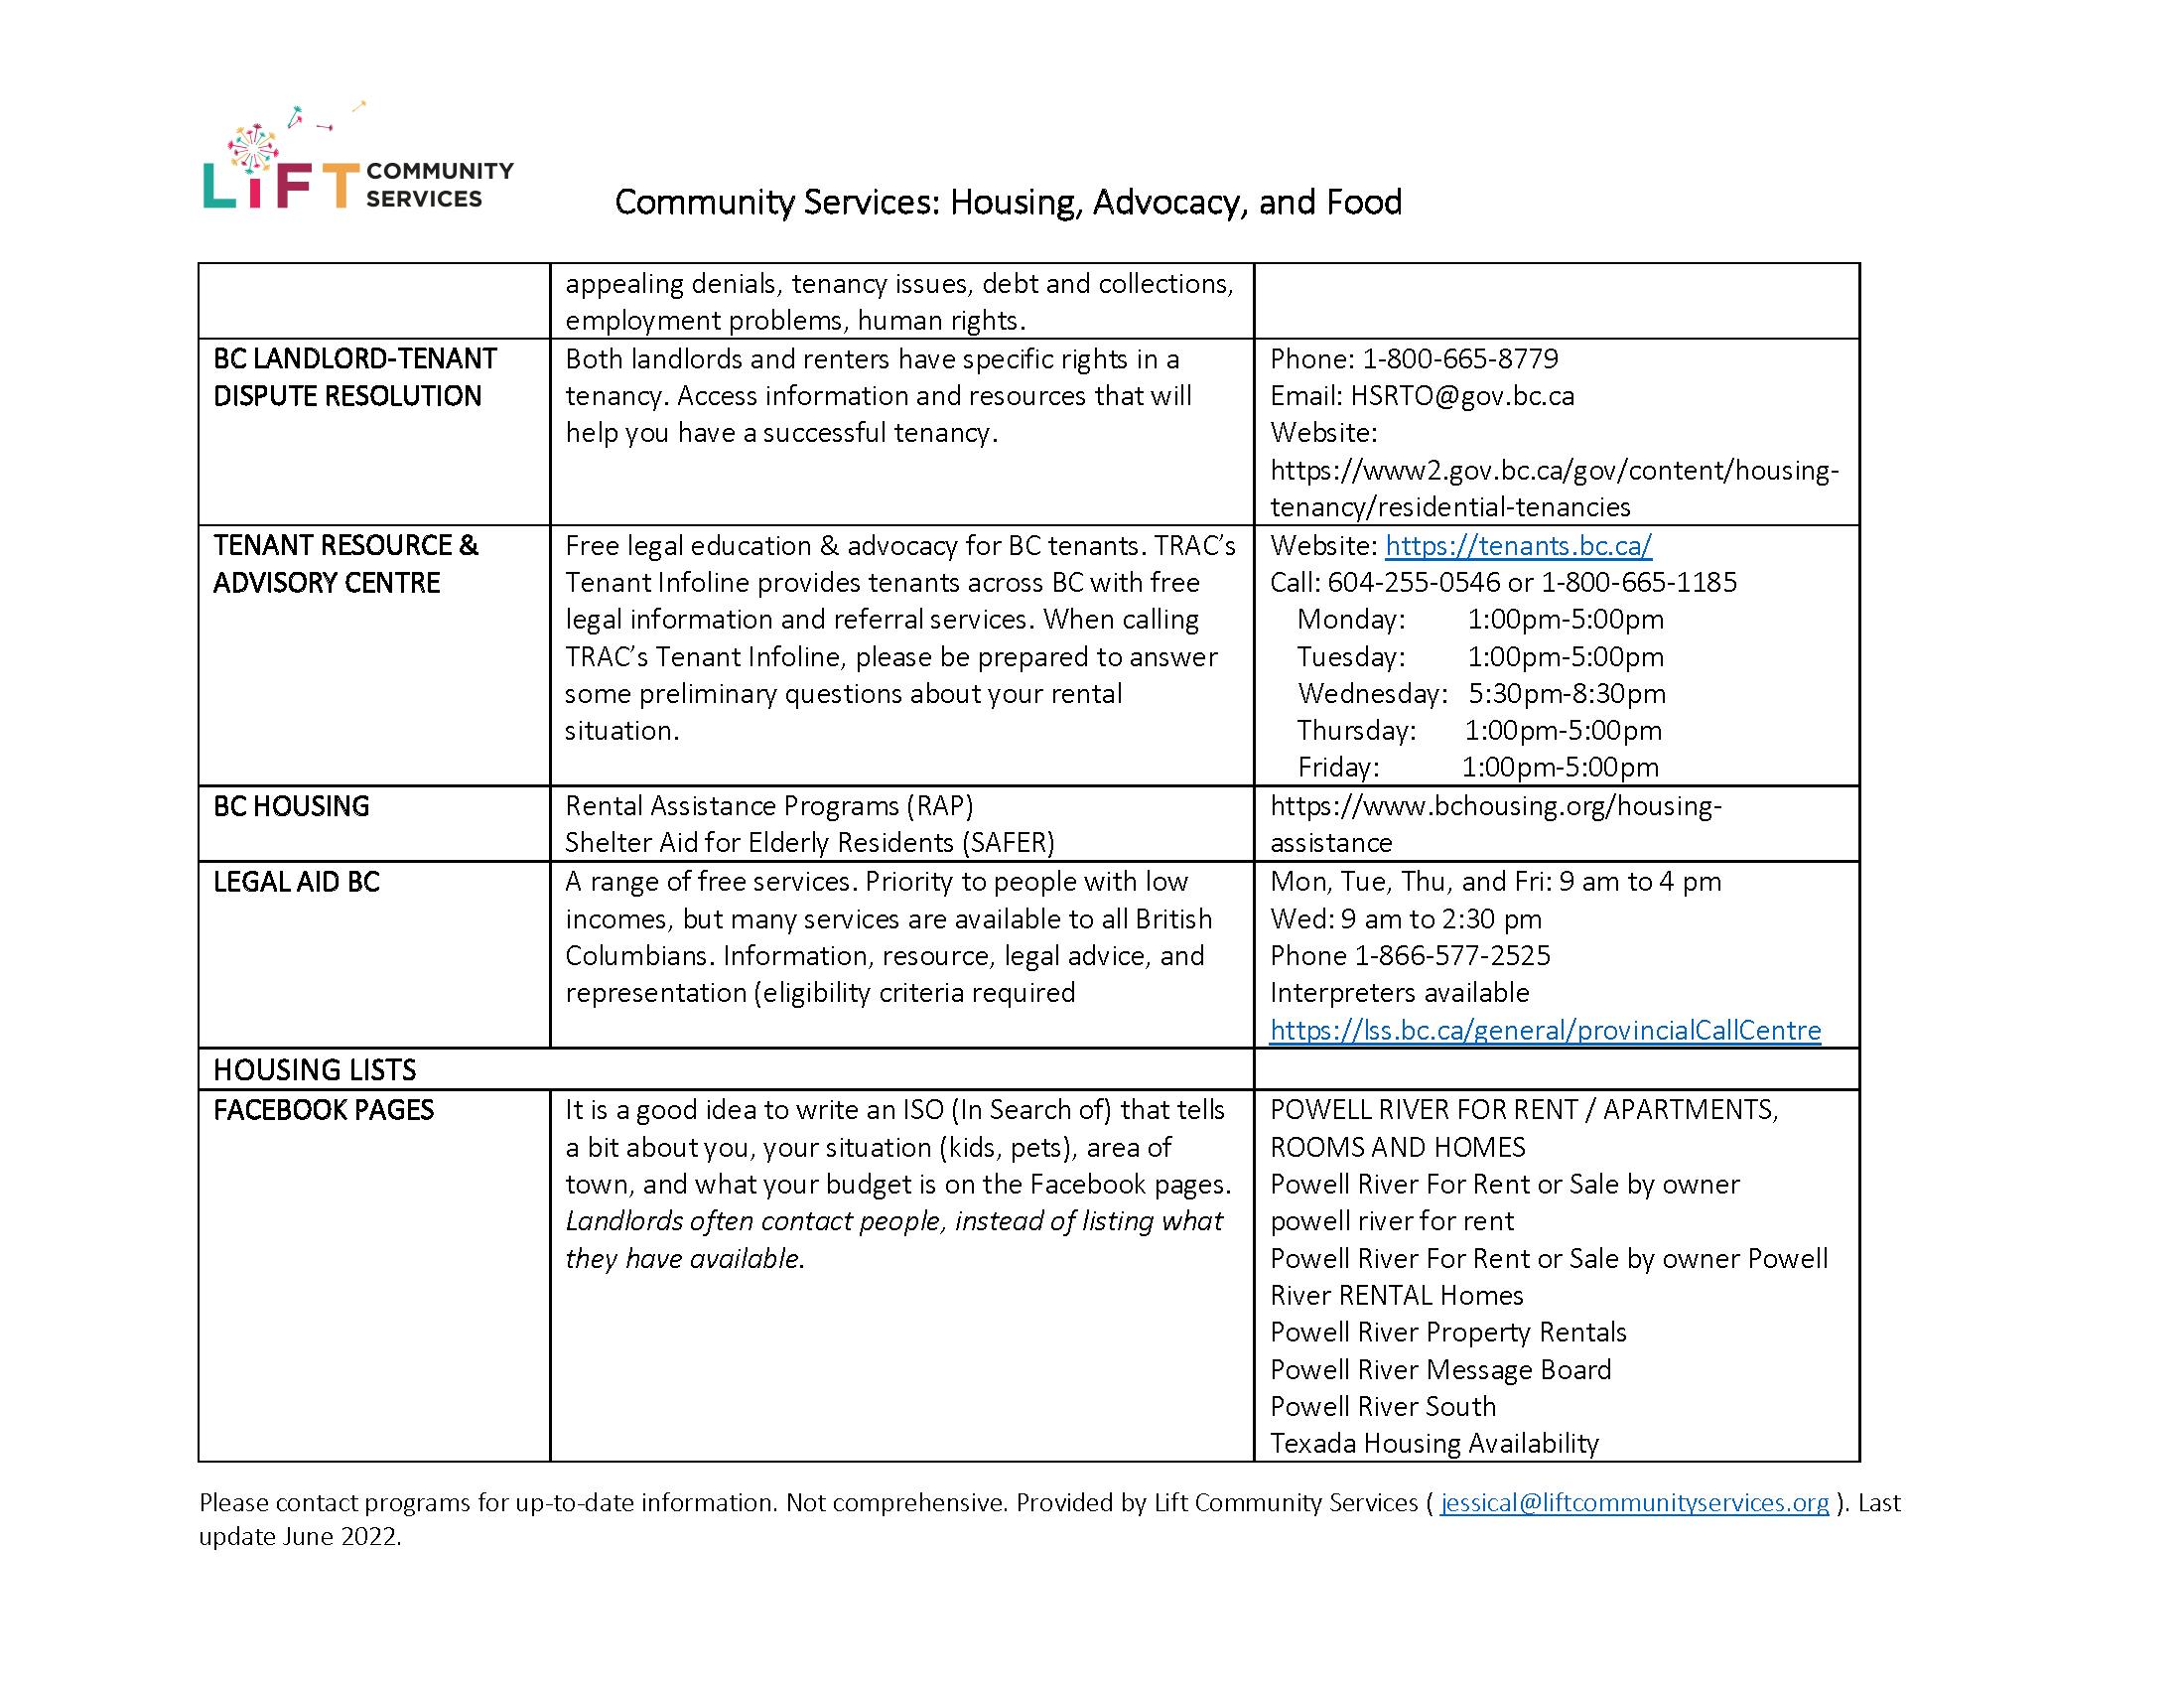 JUNE 2022 Community Resources List_Page_2.png